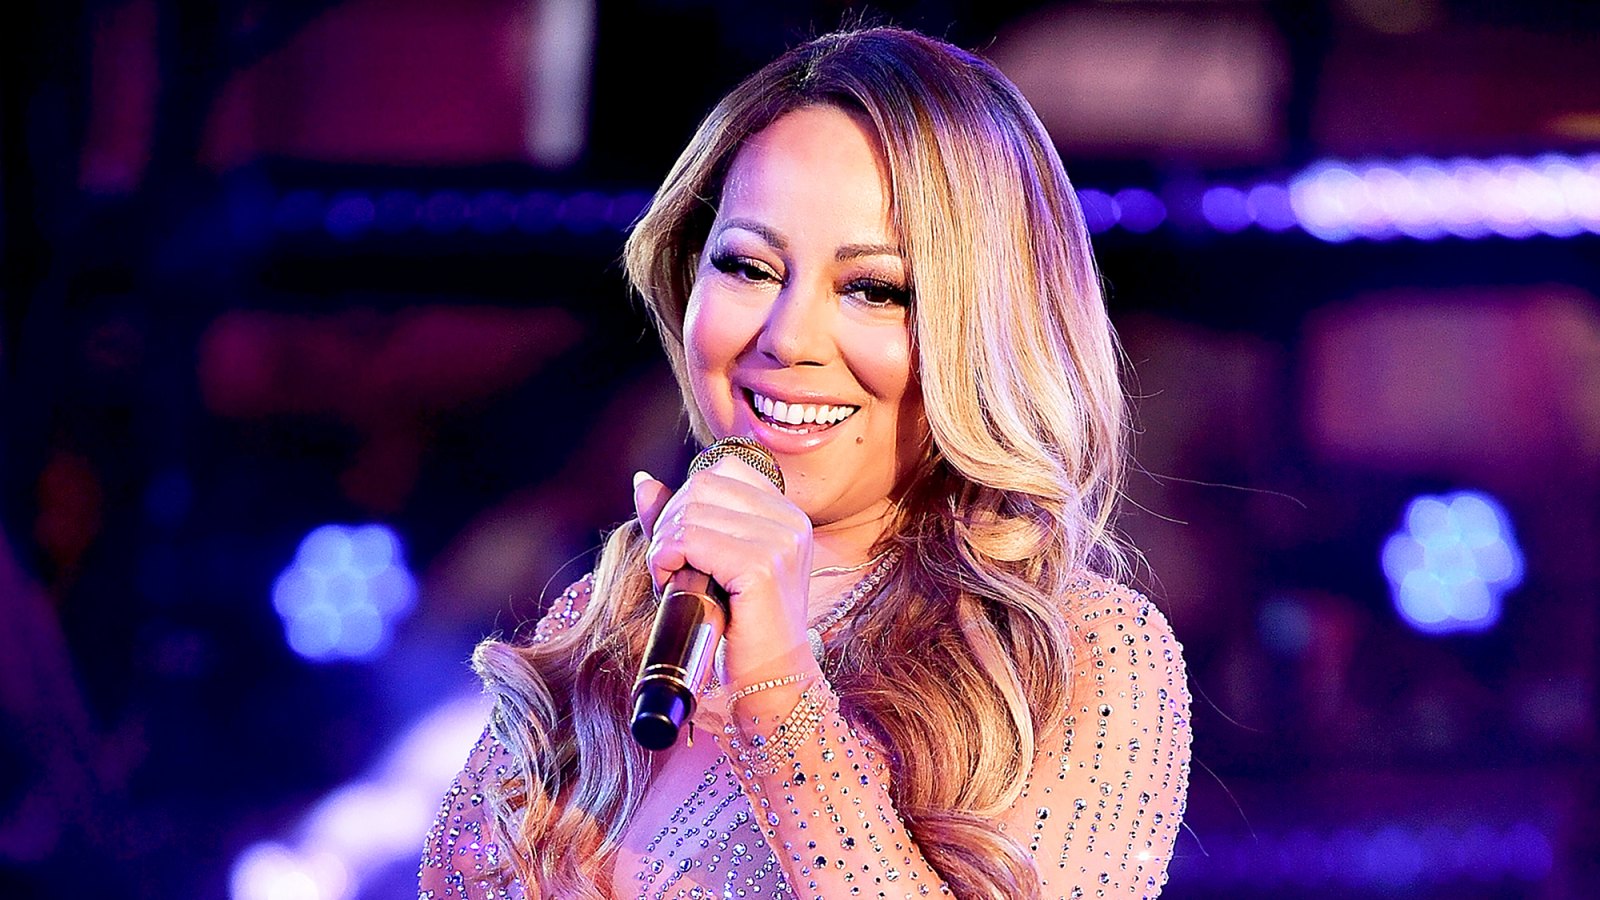 Mariah Carey performs during New Year's Eve 2017 in Times Square on December 31, 2016 in New York City.